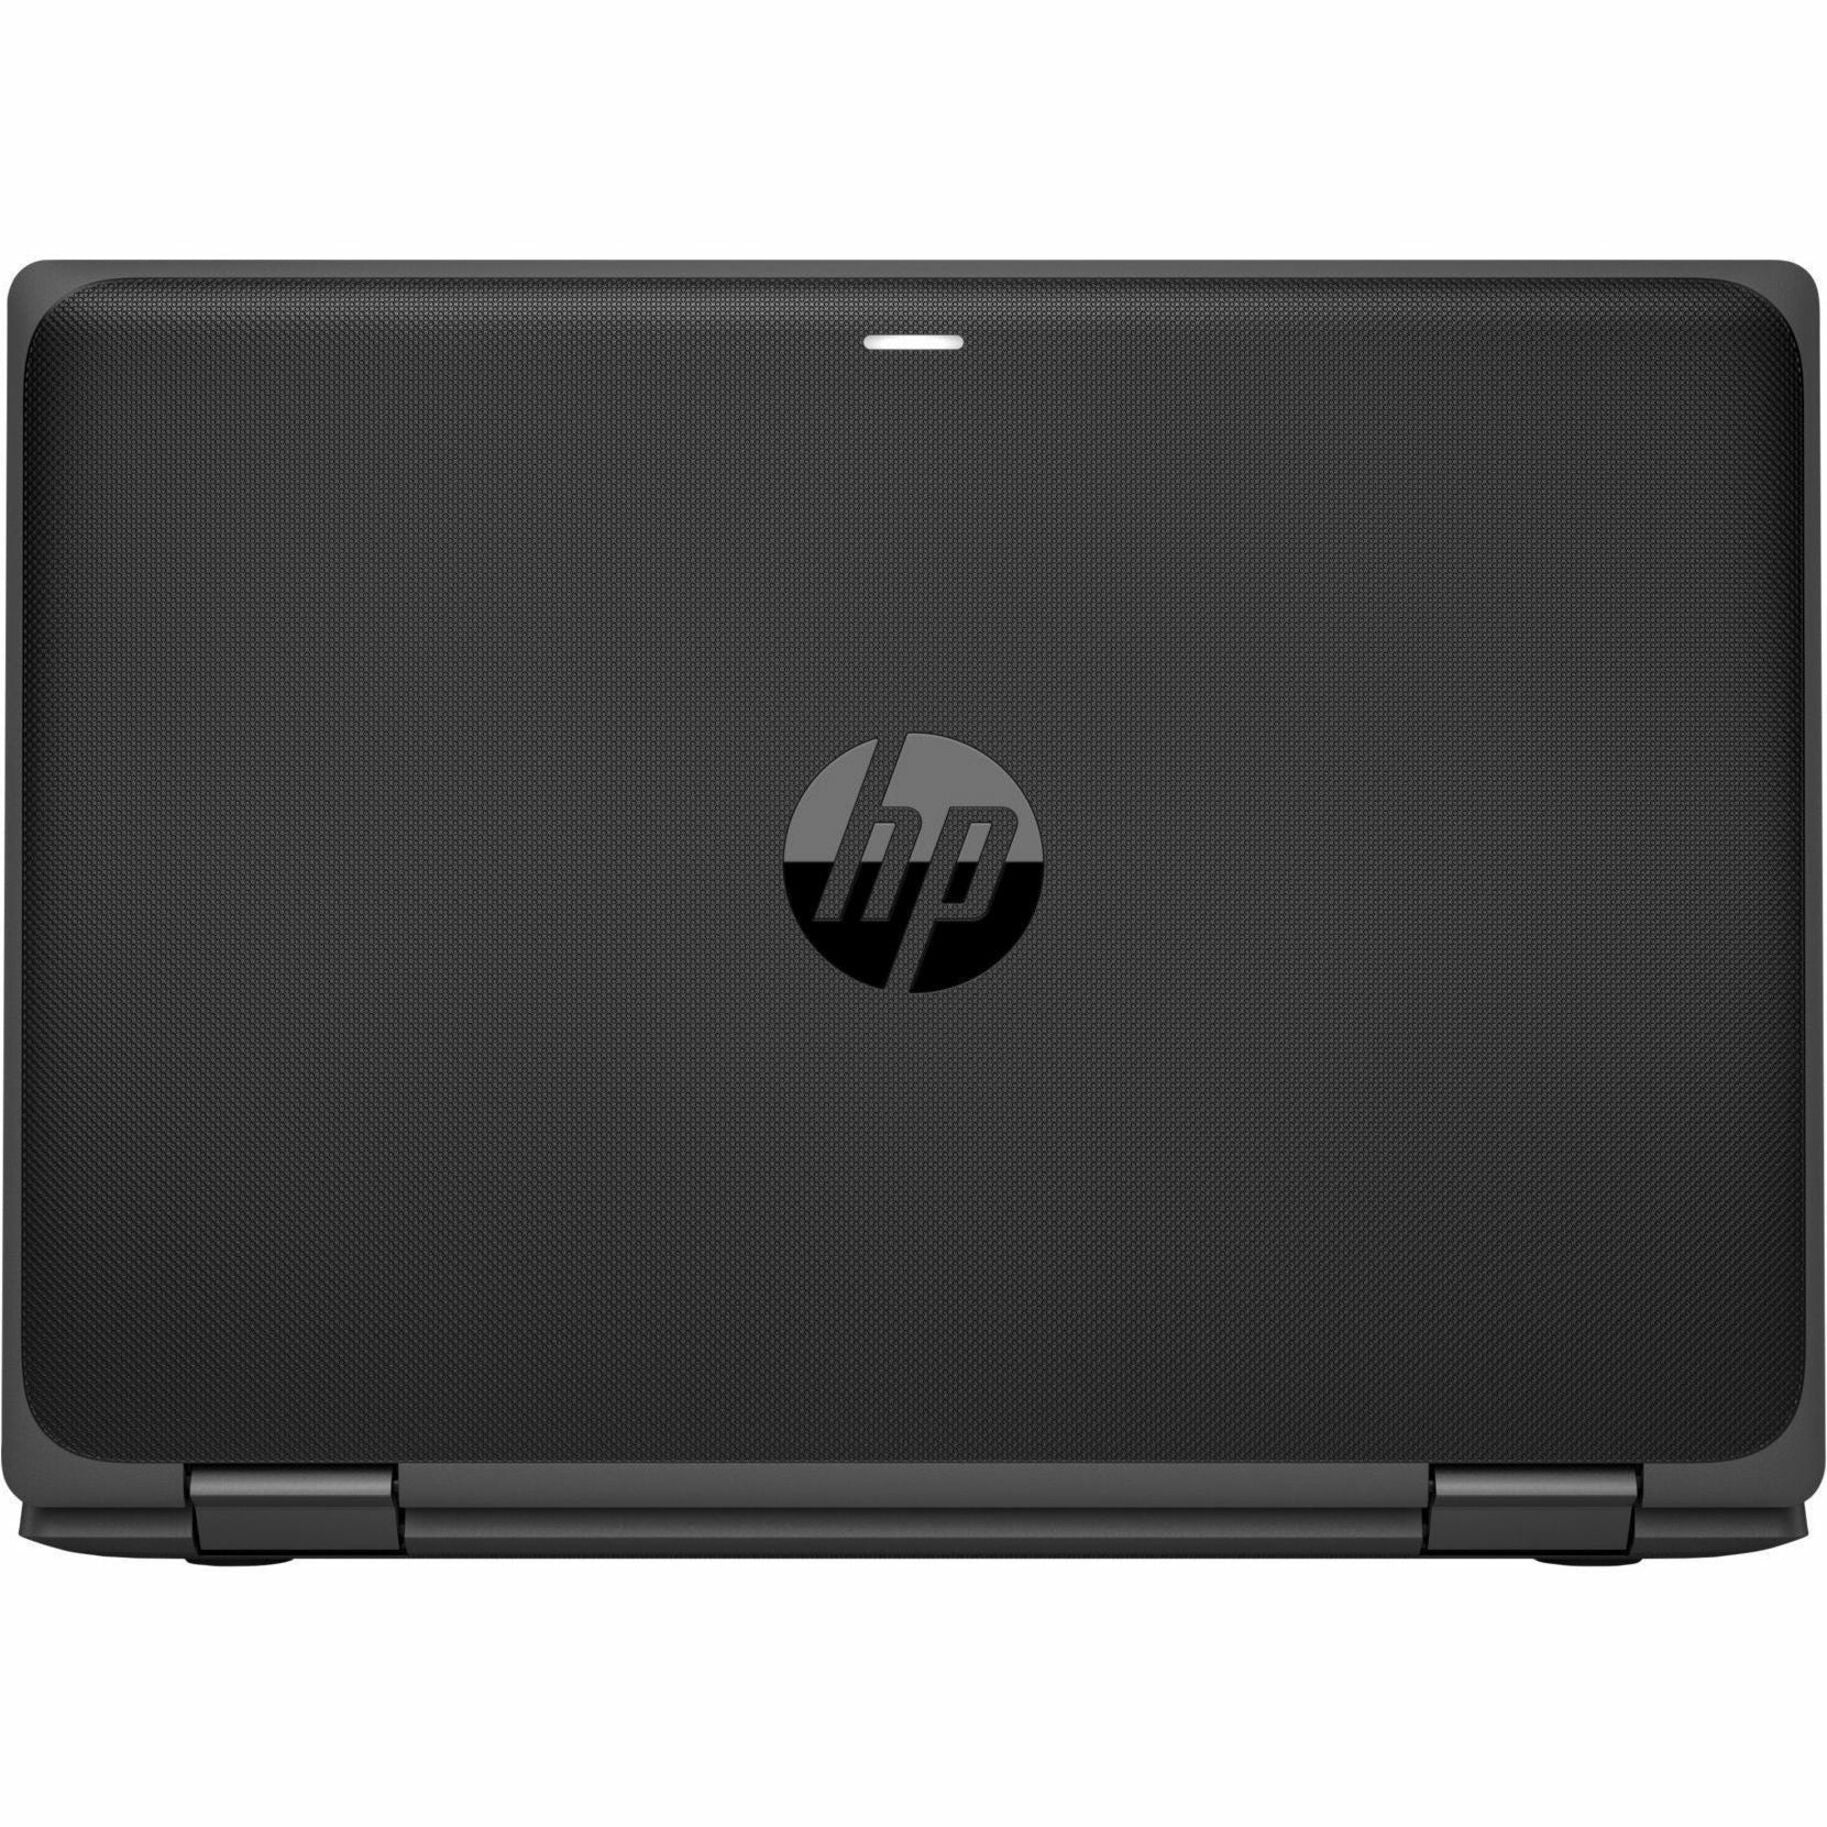 HP Pro x360 Fortis 11 inch G9 Notebook PC - Convertible 2 in 1 Laptop [Discontinued]